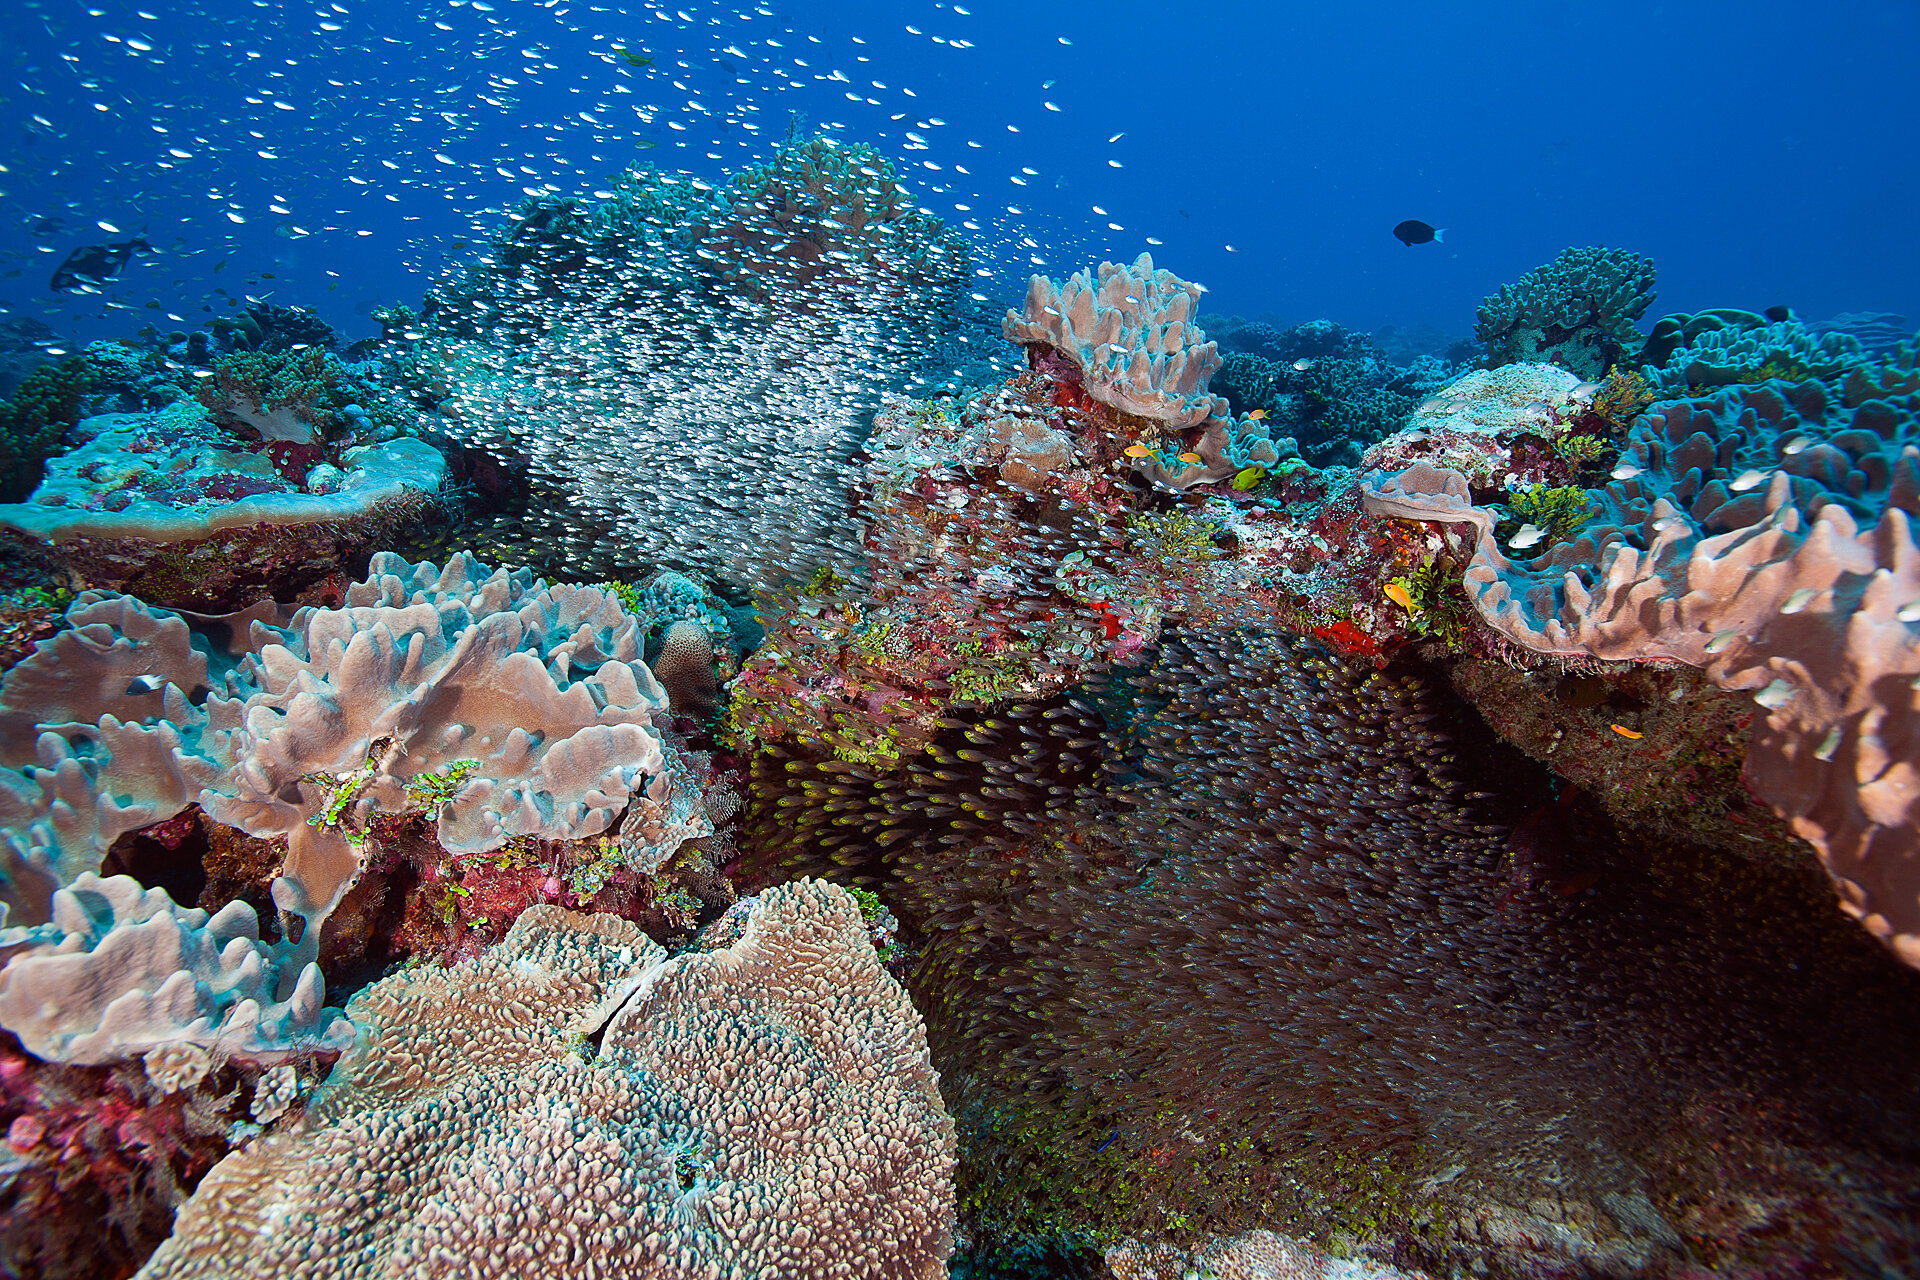 What is happening to the most remote coral reefs on the planet?